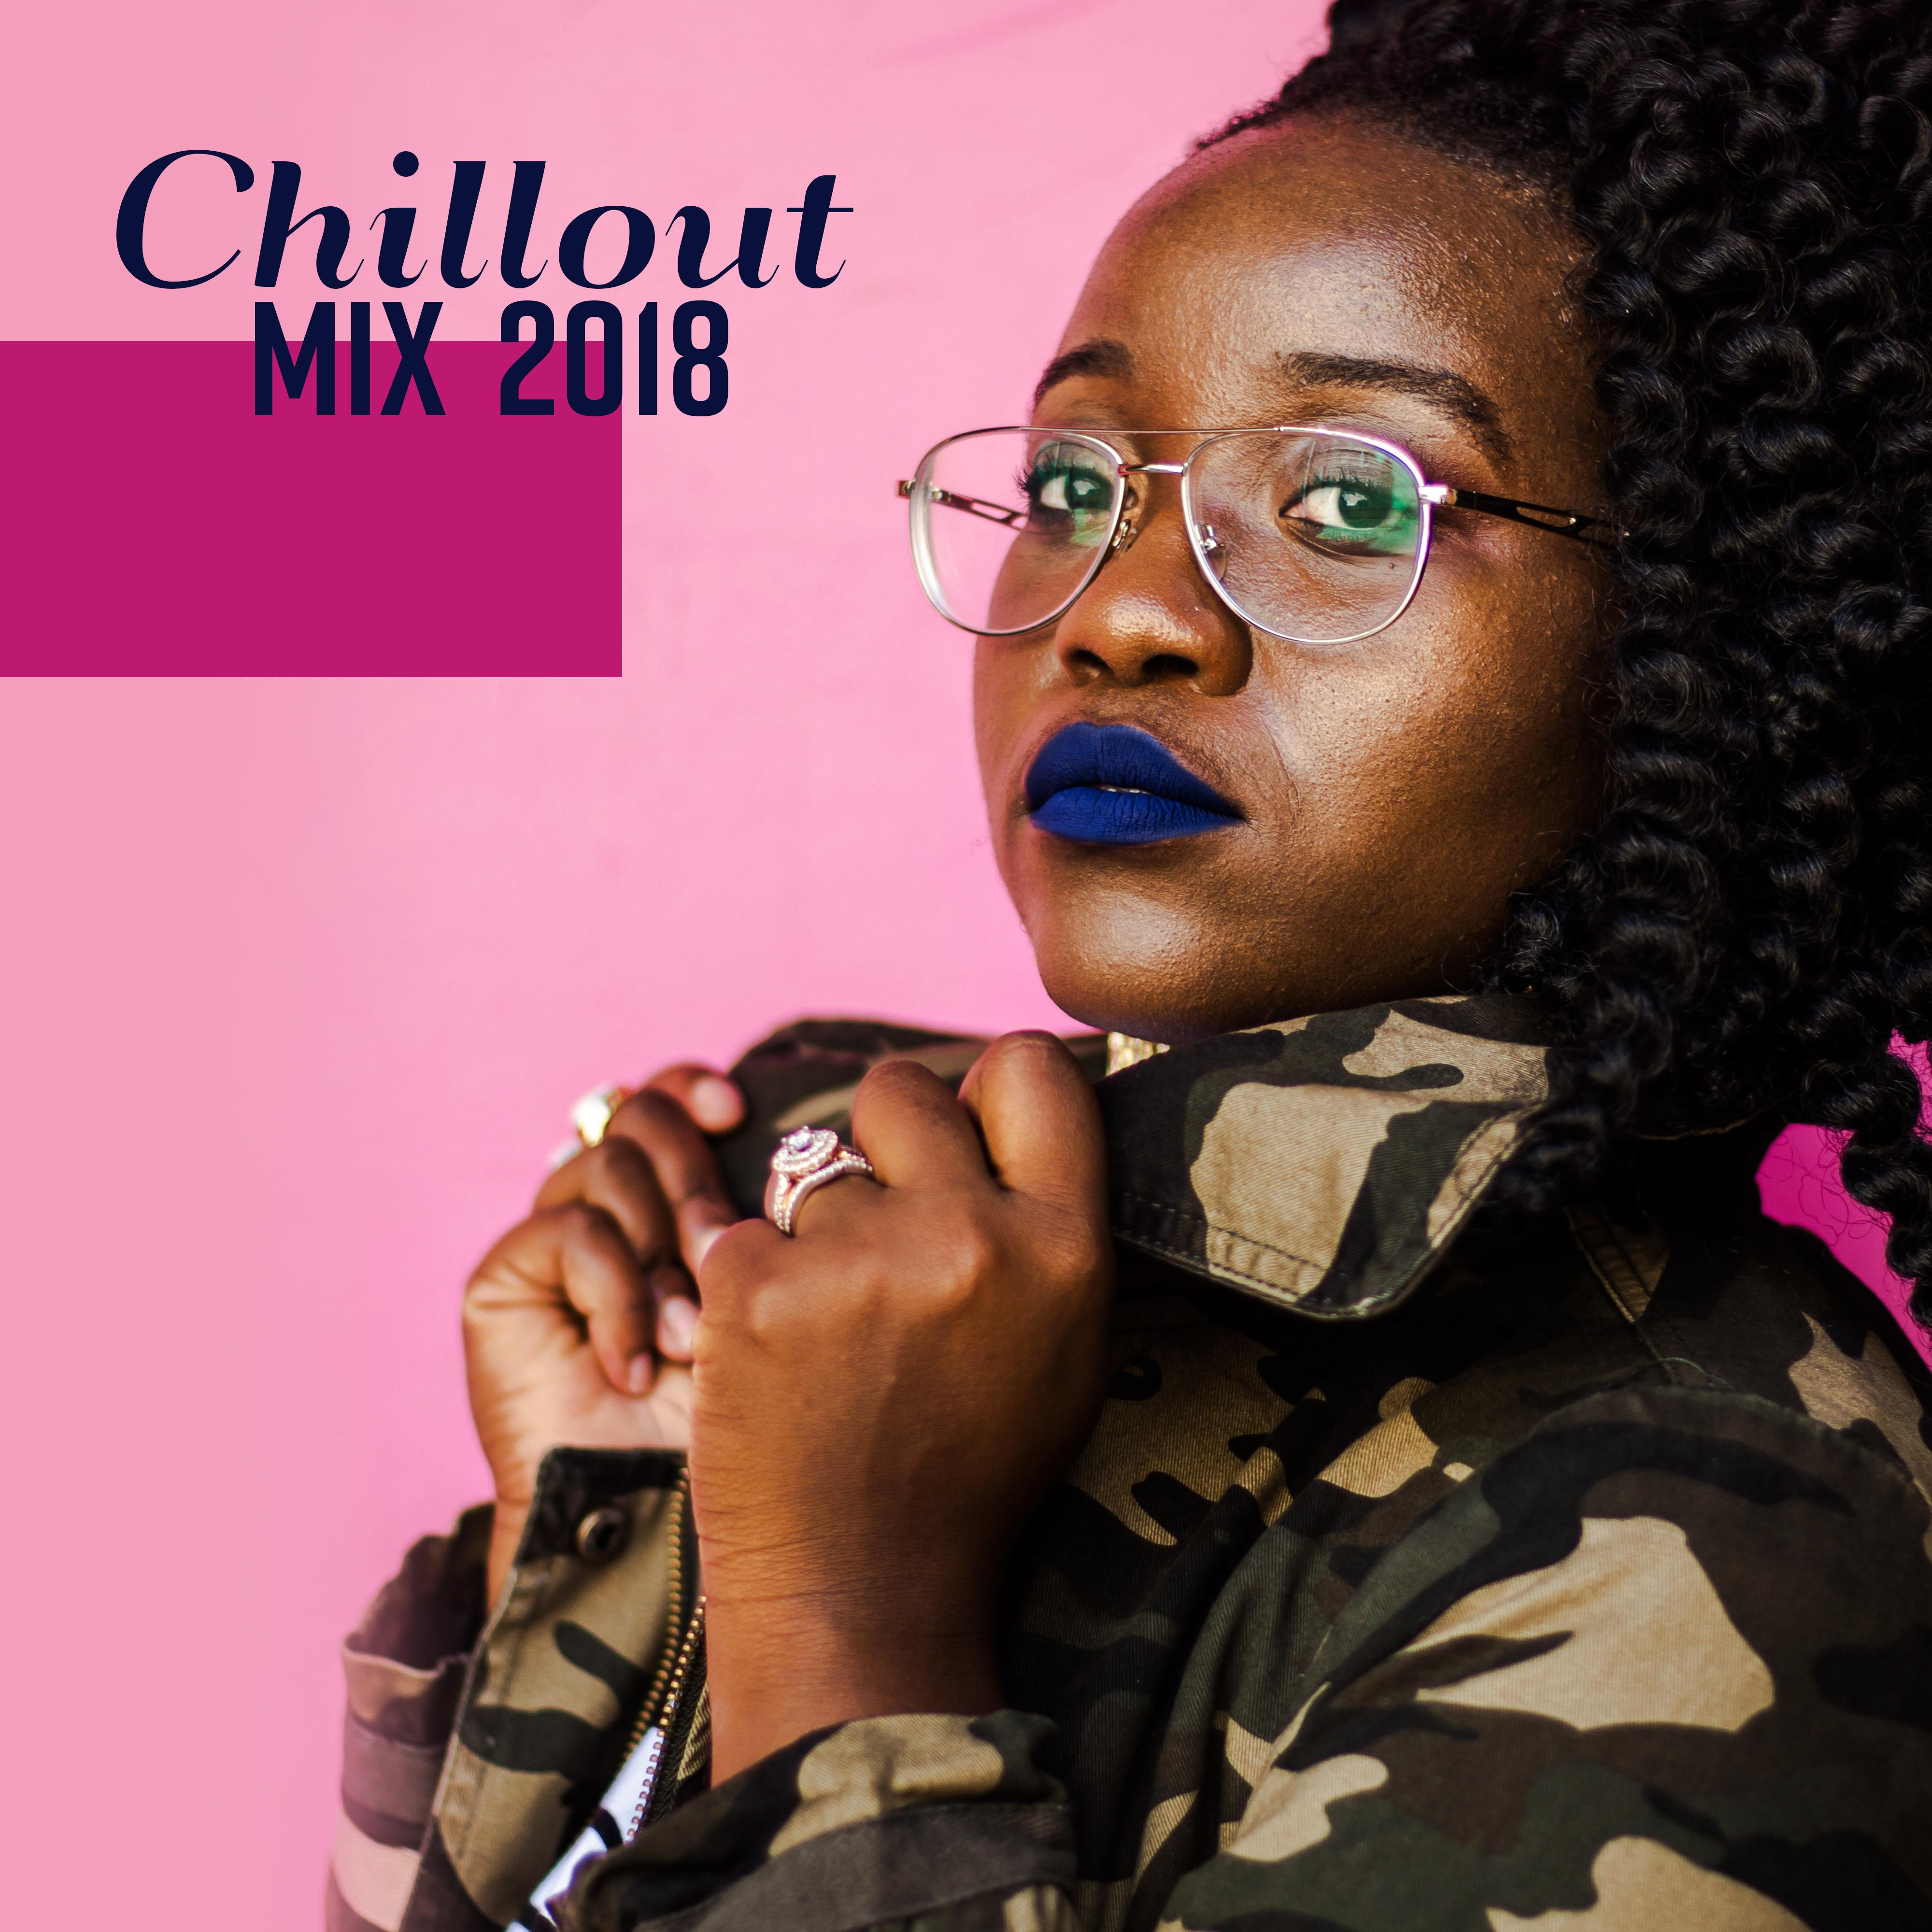 Chillout Mix 2018